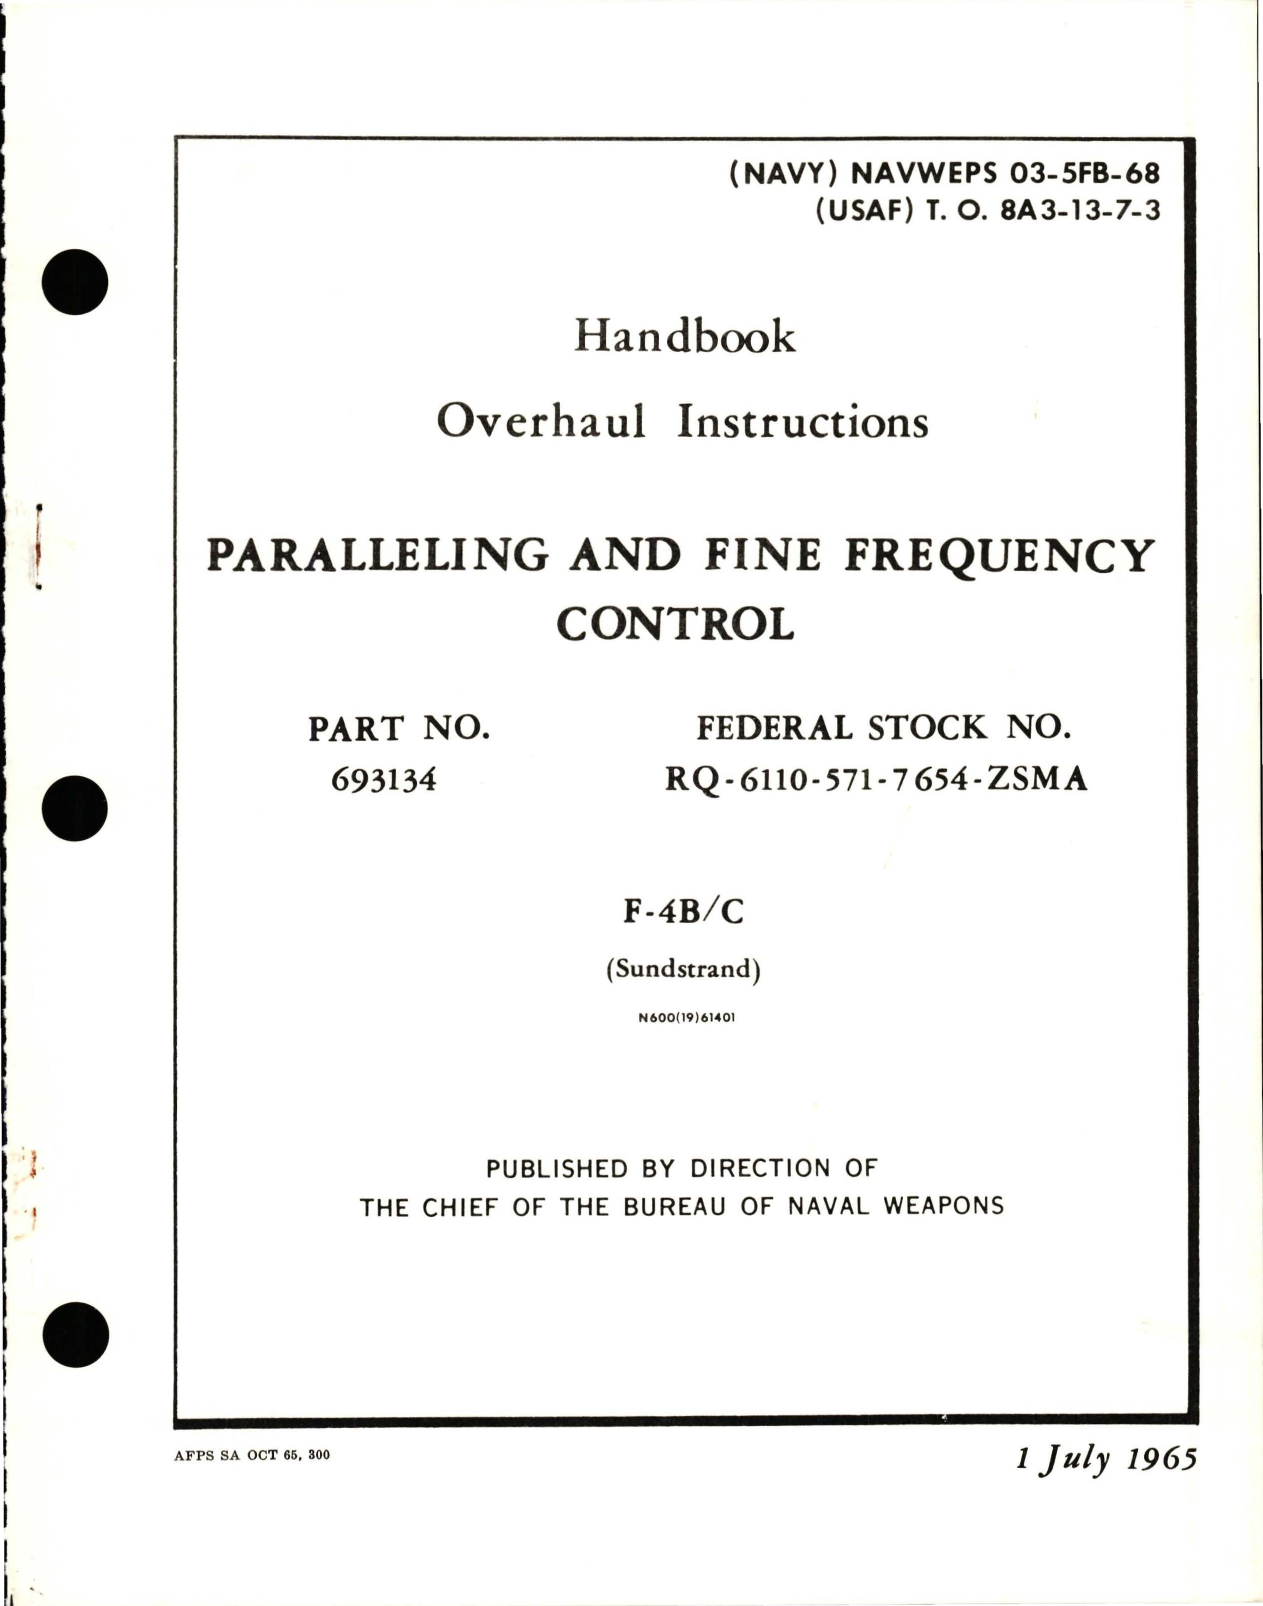 Sample page 1 from AirCorps Library document: Overhaul Instructions for Paralleling & Fine Frequency Control - Part 693134  - F-4B/C